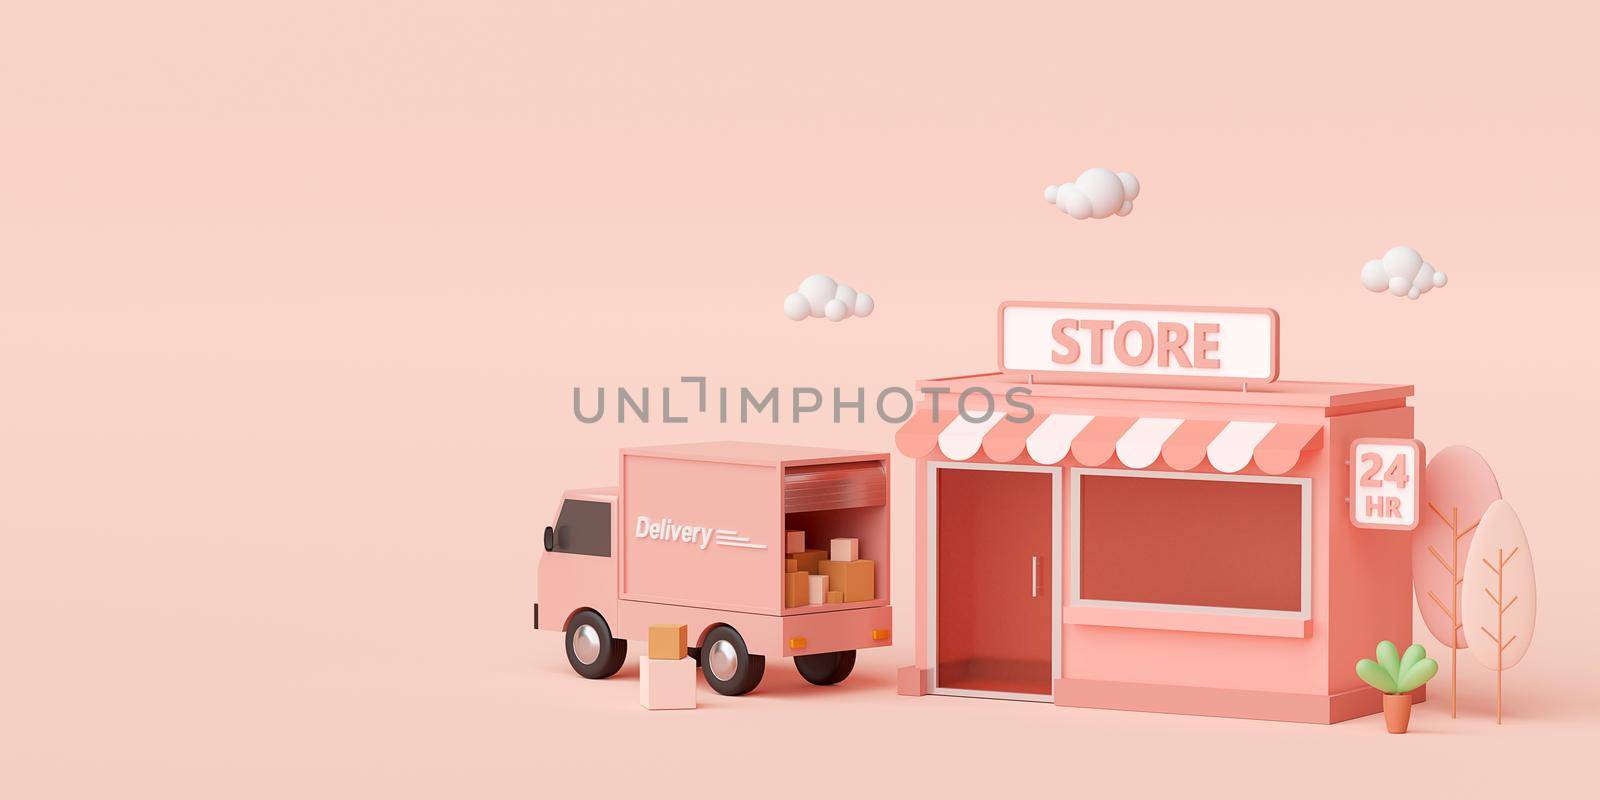 E-commerce concept, Convenience store and delivery service by truck, 3d illustration